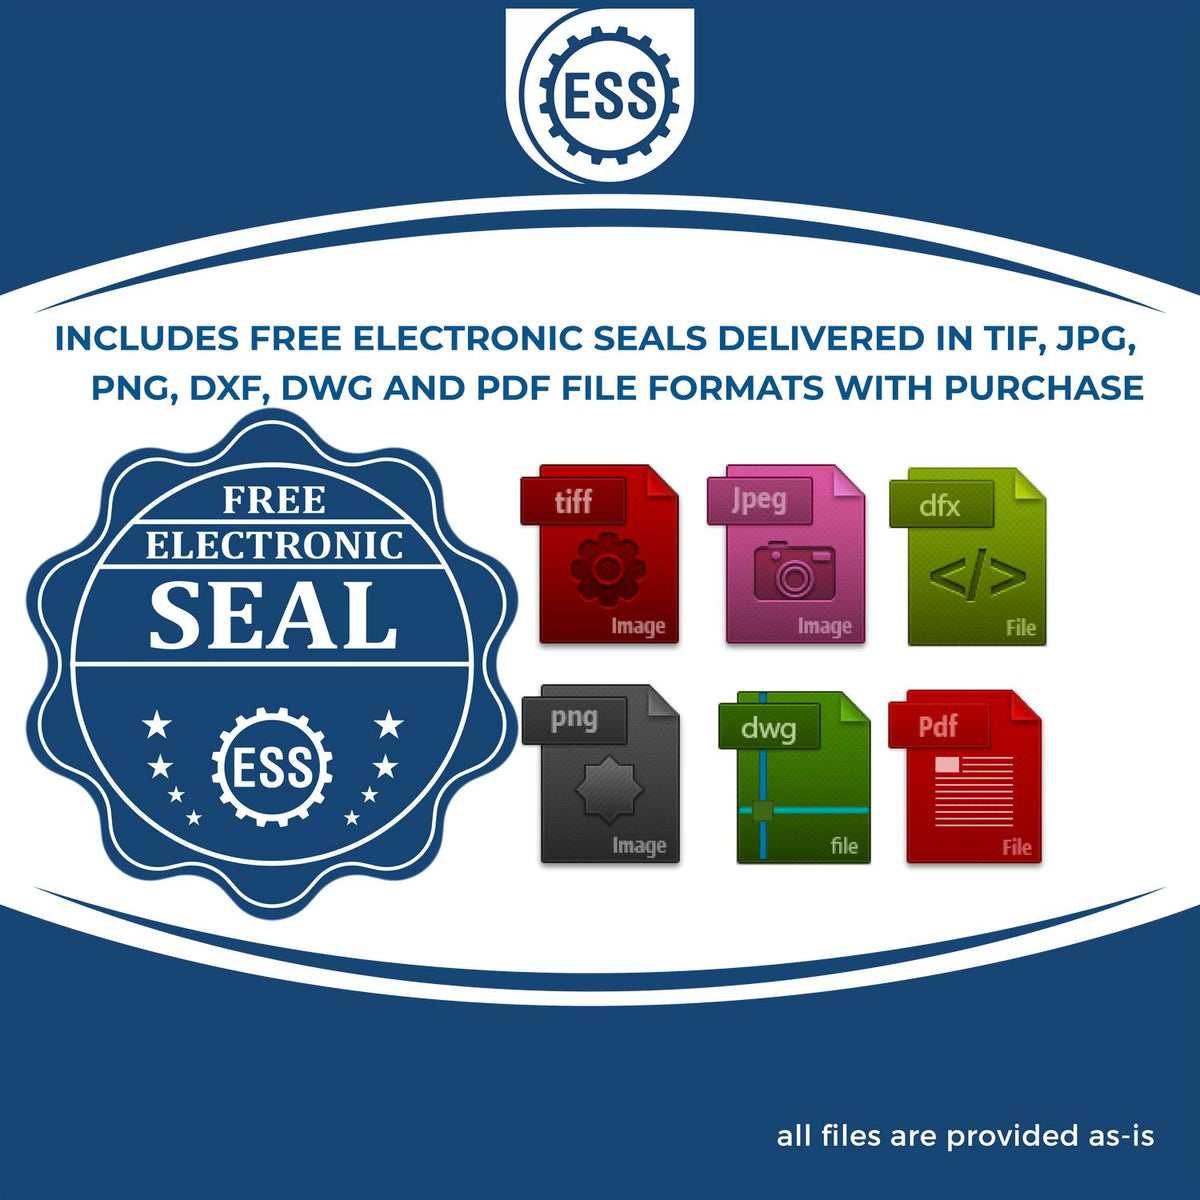 An infographic for the free electronic seal for the Heavy Duty Cast Iron Louisiana Engineer Seal Embosser illustrating the different file type icons such as DXF, DWG, TIF, JPG and PNG.